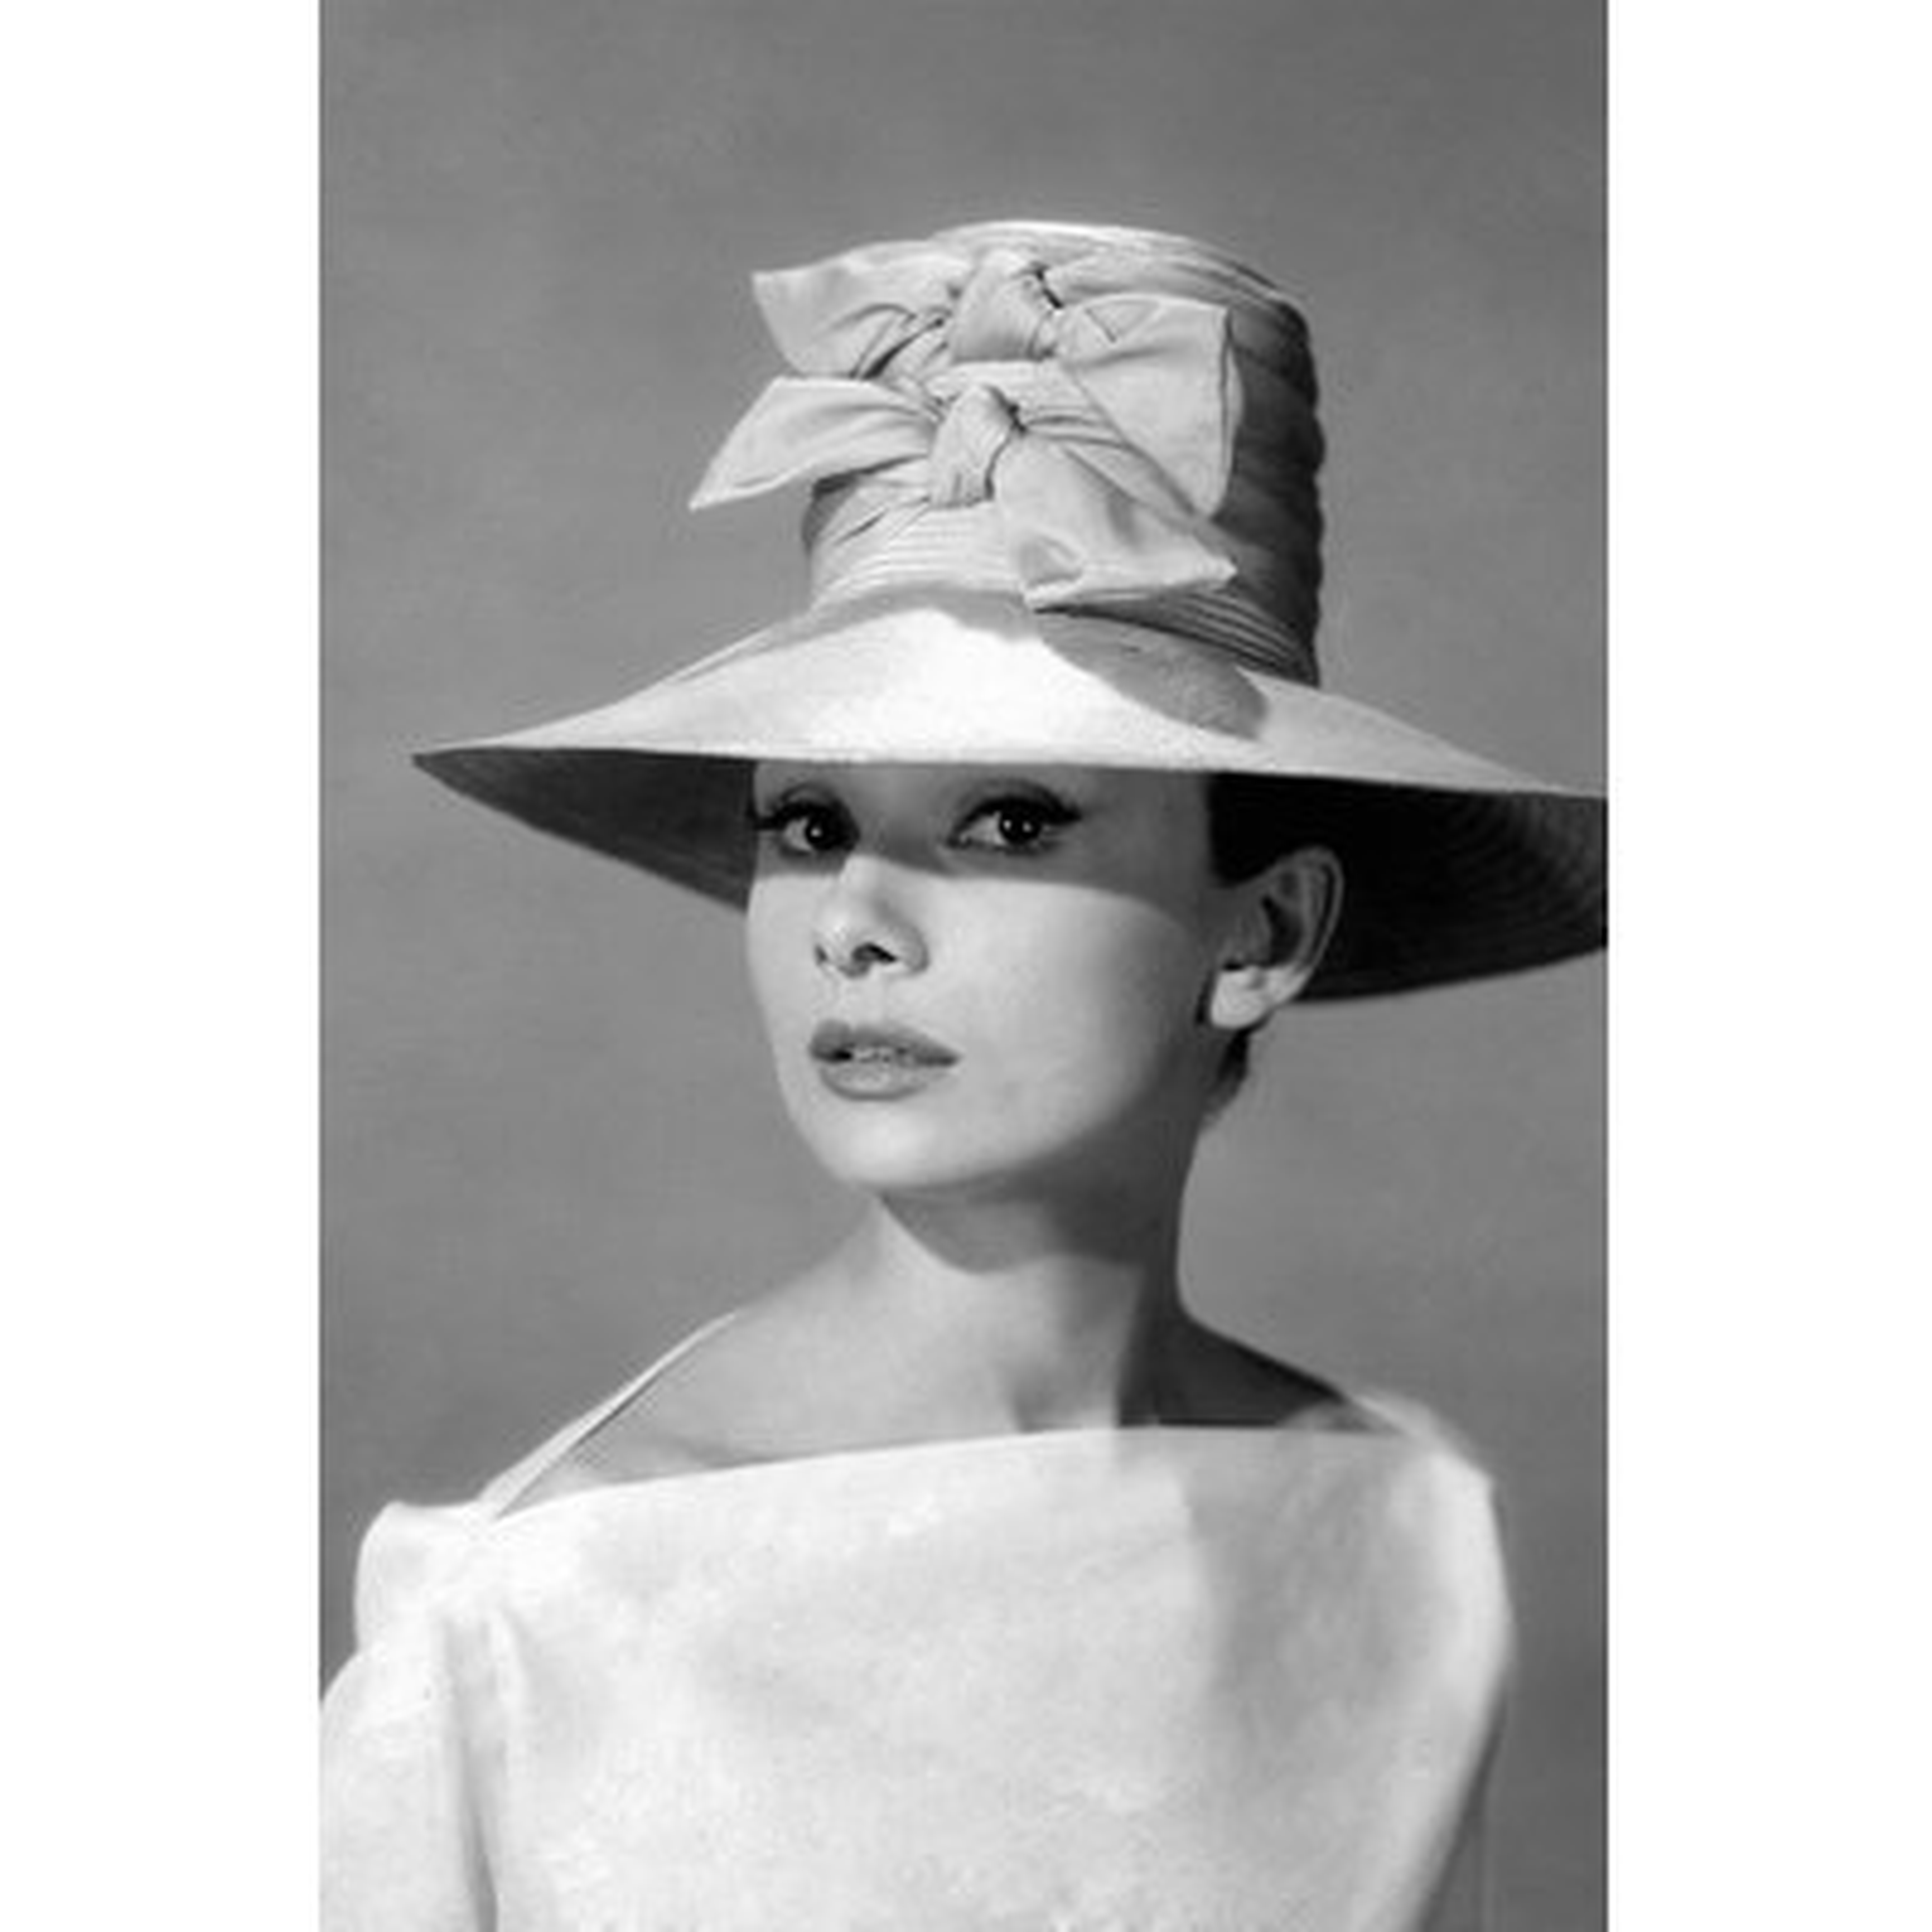 Radio Days 'Audrey Hepburn in A Tall Two-Bowed Hat' Photographic Print on Canvas - Wayfair